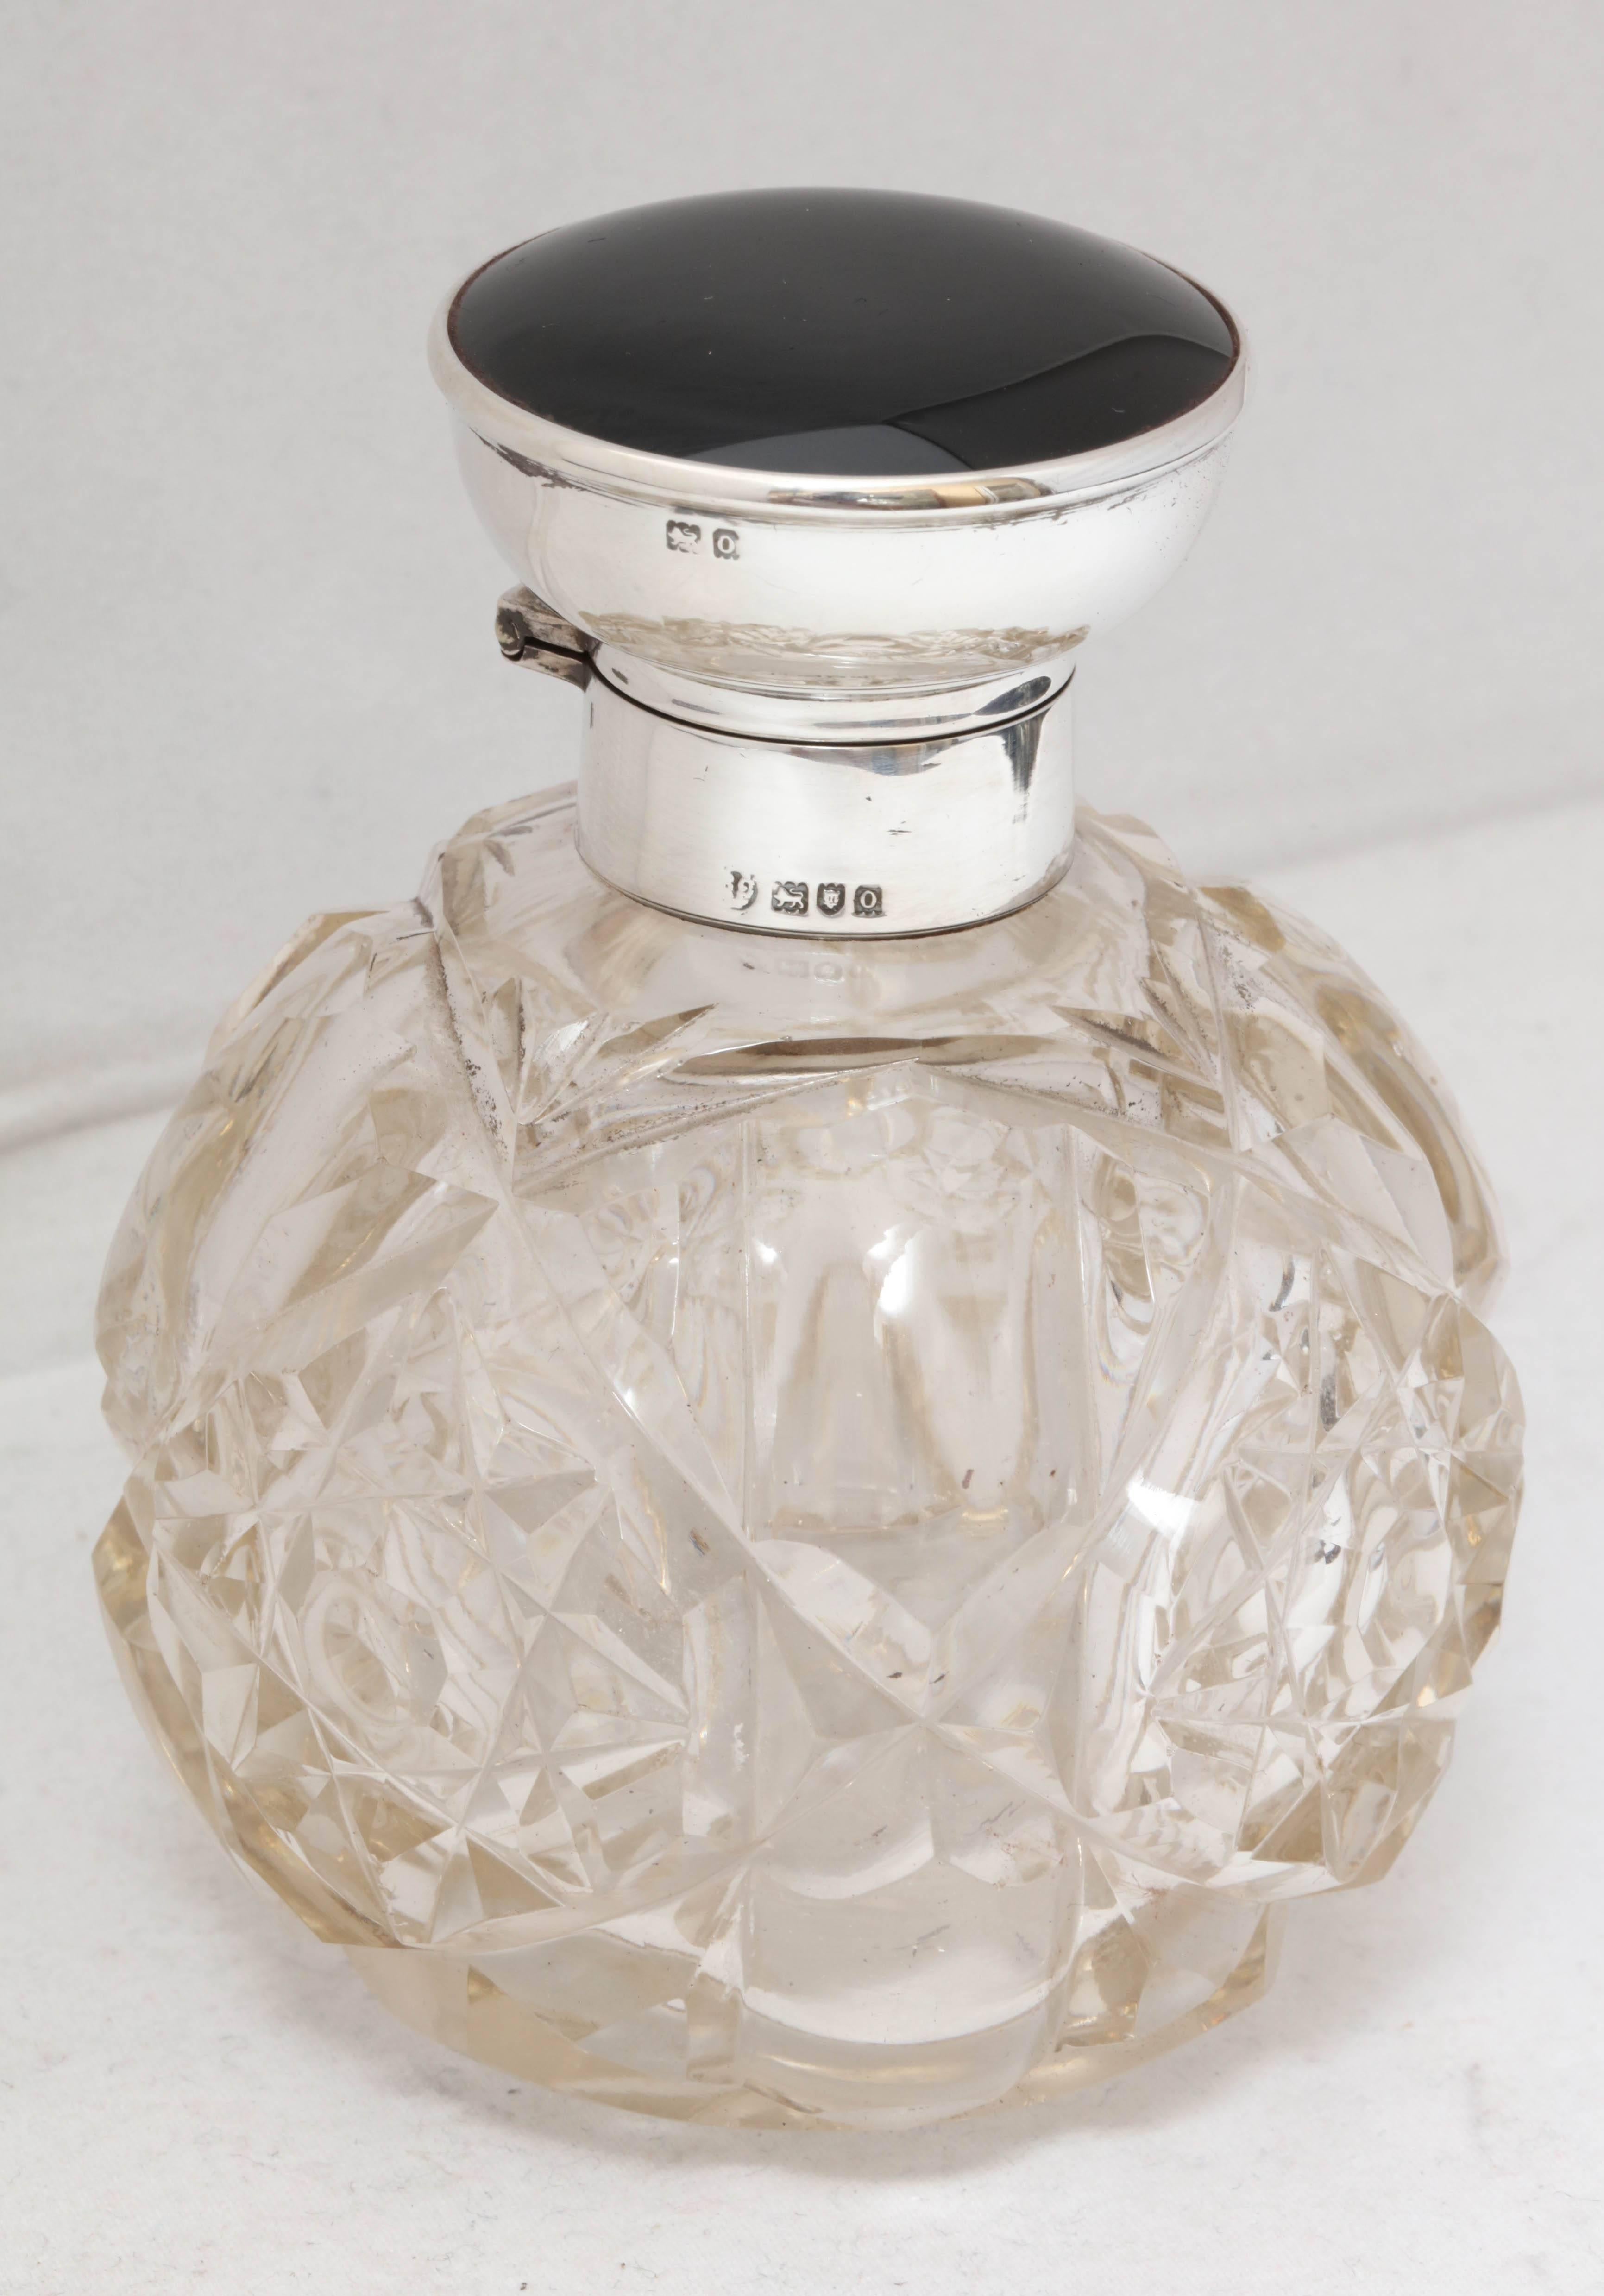 Edwardian, sterling silver and onyx-mounted cut crystal perfume bottle, London, 1909. Hinged lid. Measures: 4 1/4